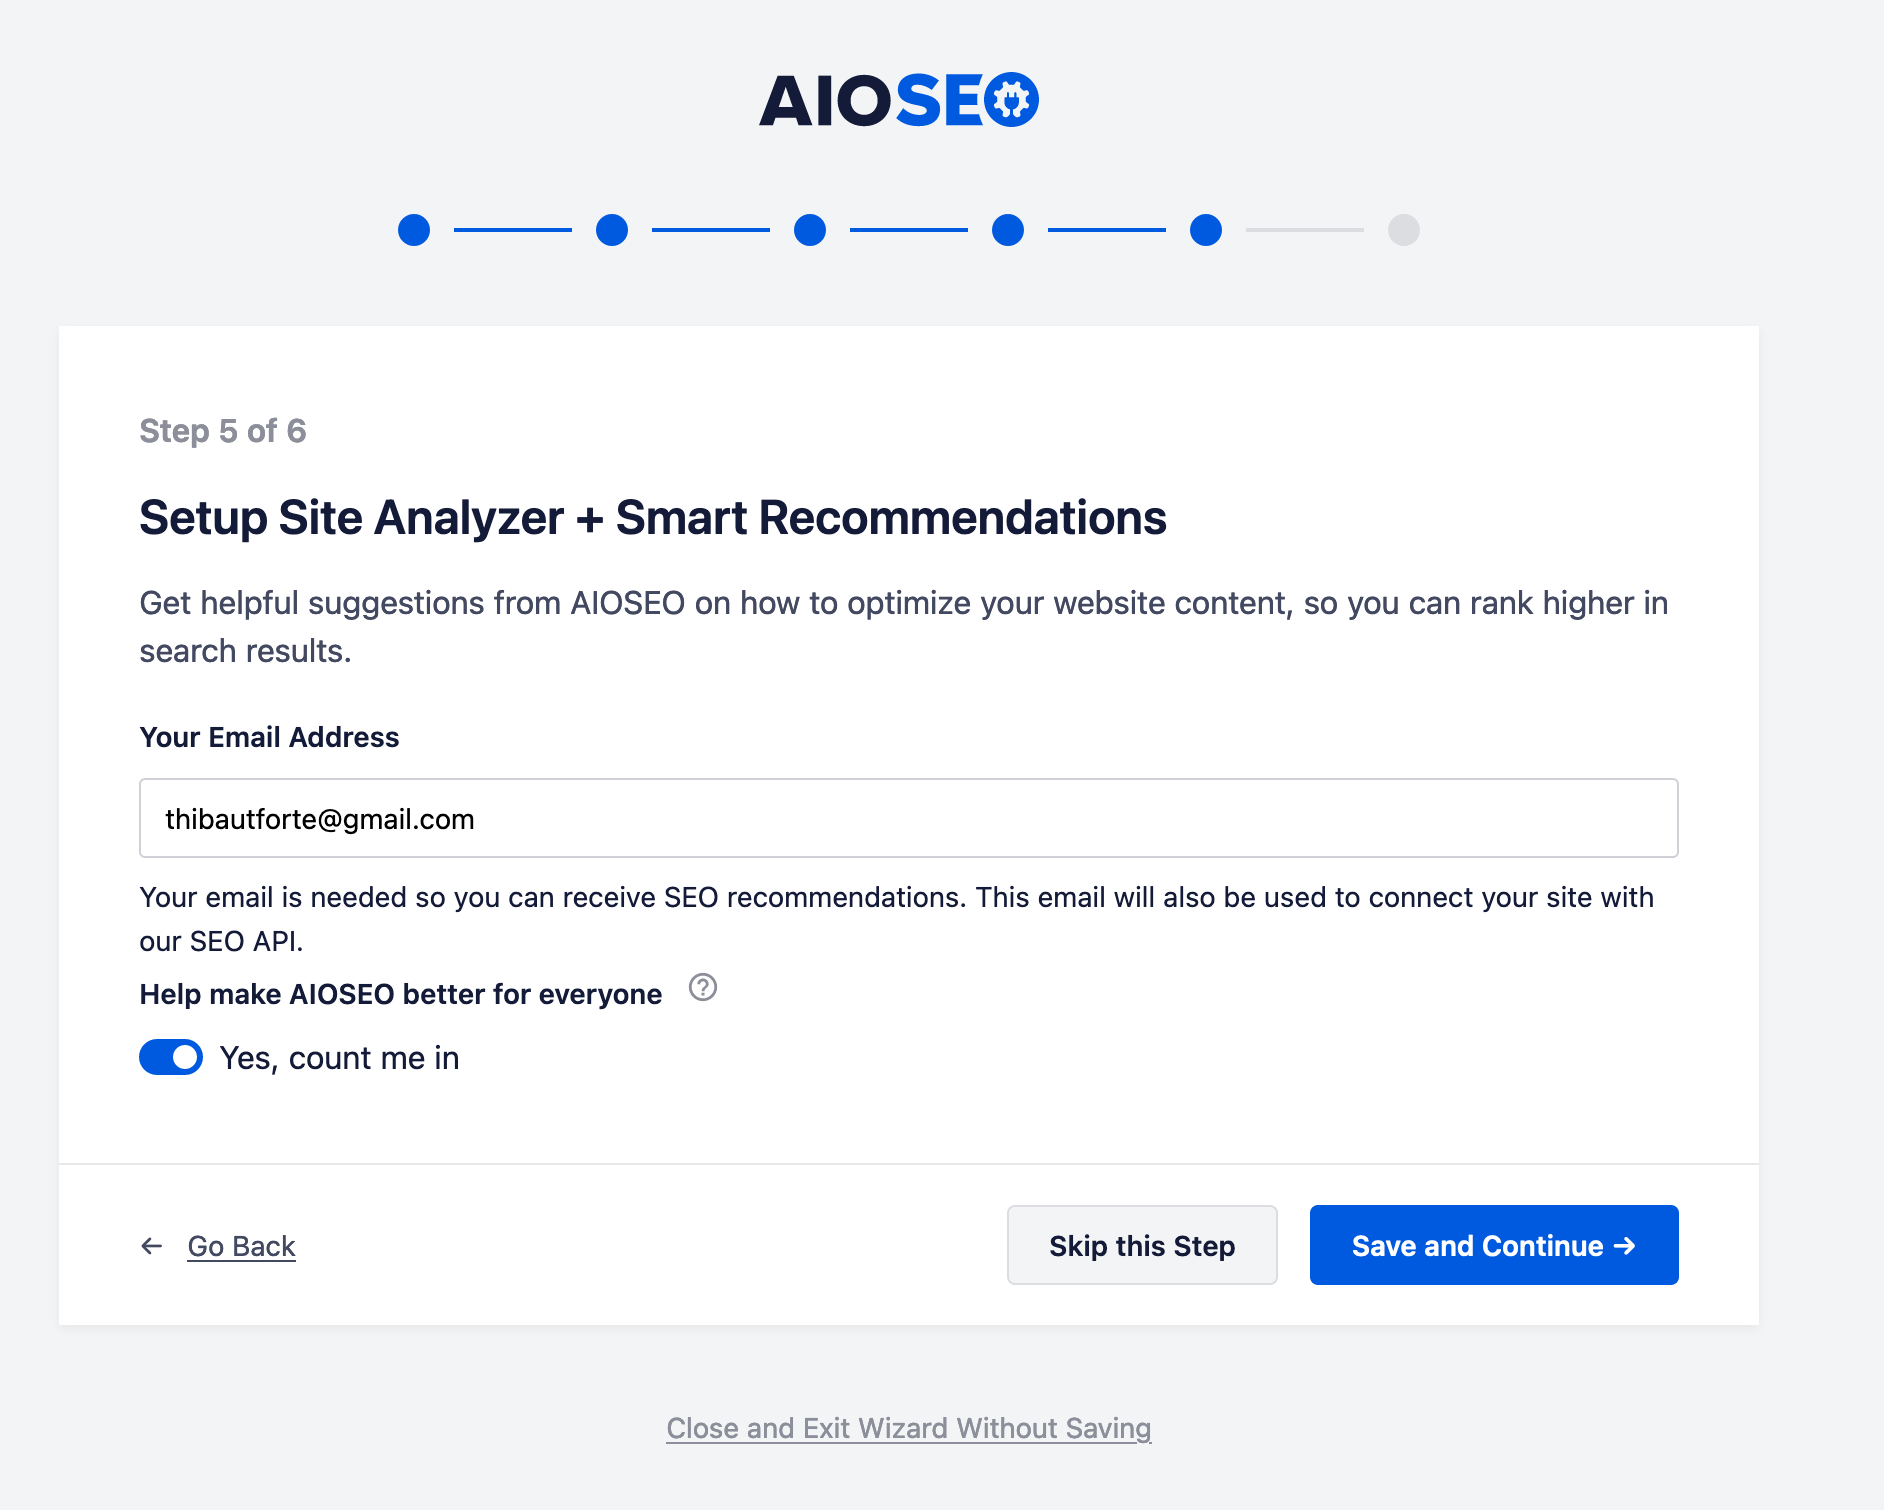 The All in One SEO plugin offers a site analyzer and smart recommendations.